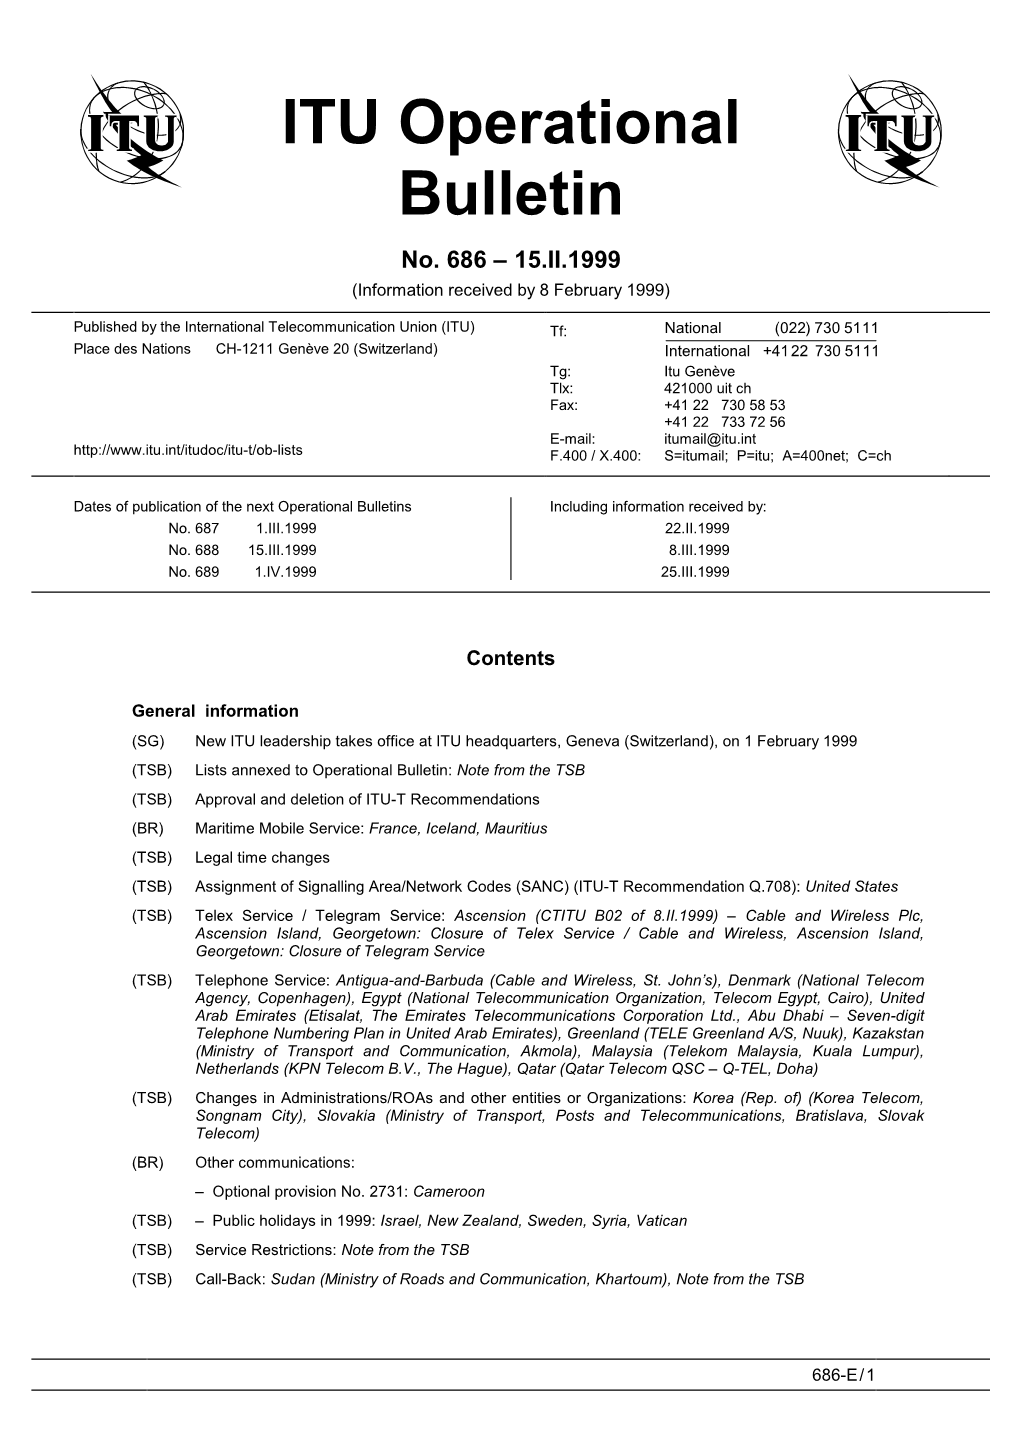 ITU Operational Bulletin No. 686 – 15.II.1999 (Information Received by 8 February 1999)